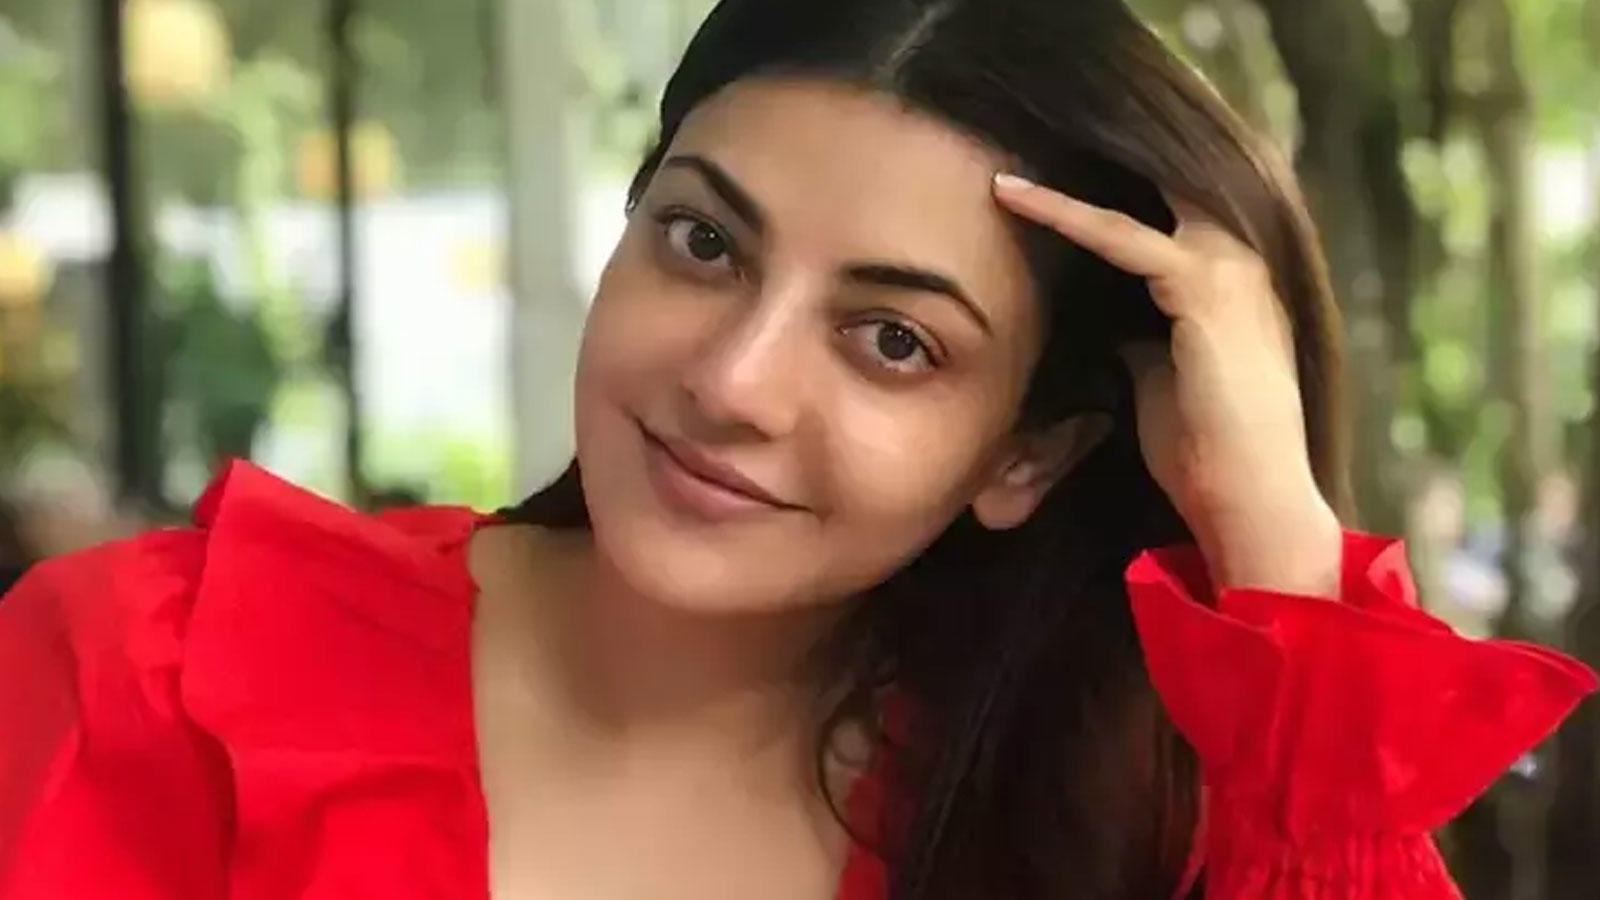 Kajal Heroine Ke Choda Chudi Bf Video - Kajal Aggarwal opens up about quitting acting in films | Hindi Movie News -  Bollywood - Times of India